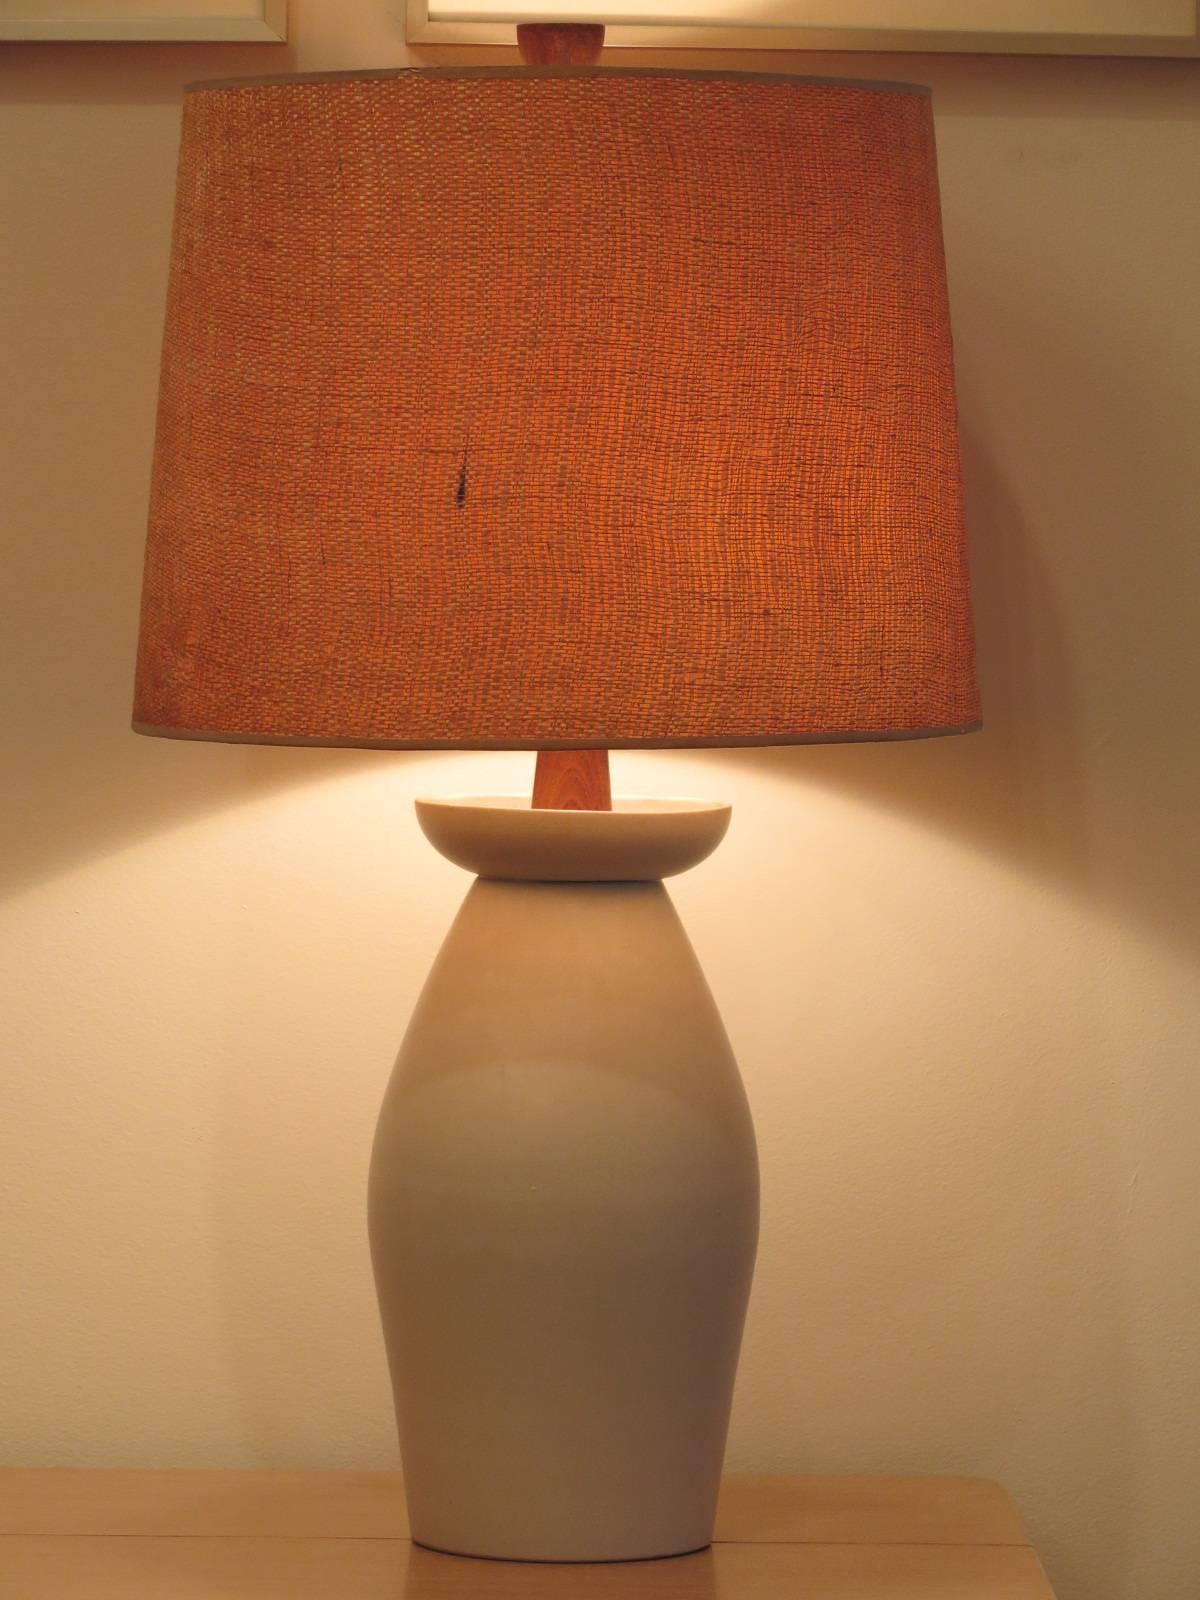 Iconic off white Martz table lamp with original shade. Wood finial, signed Martz.